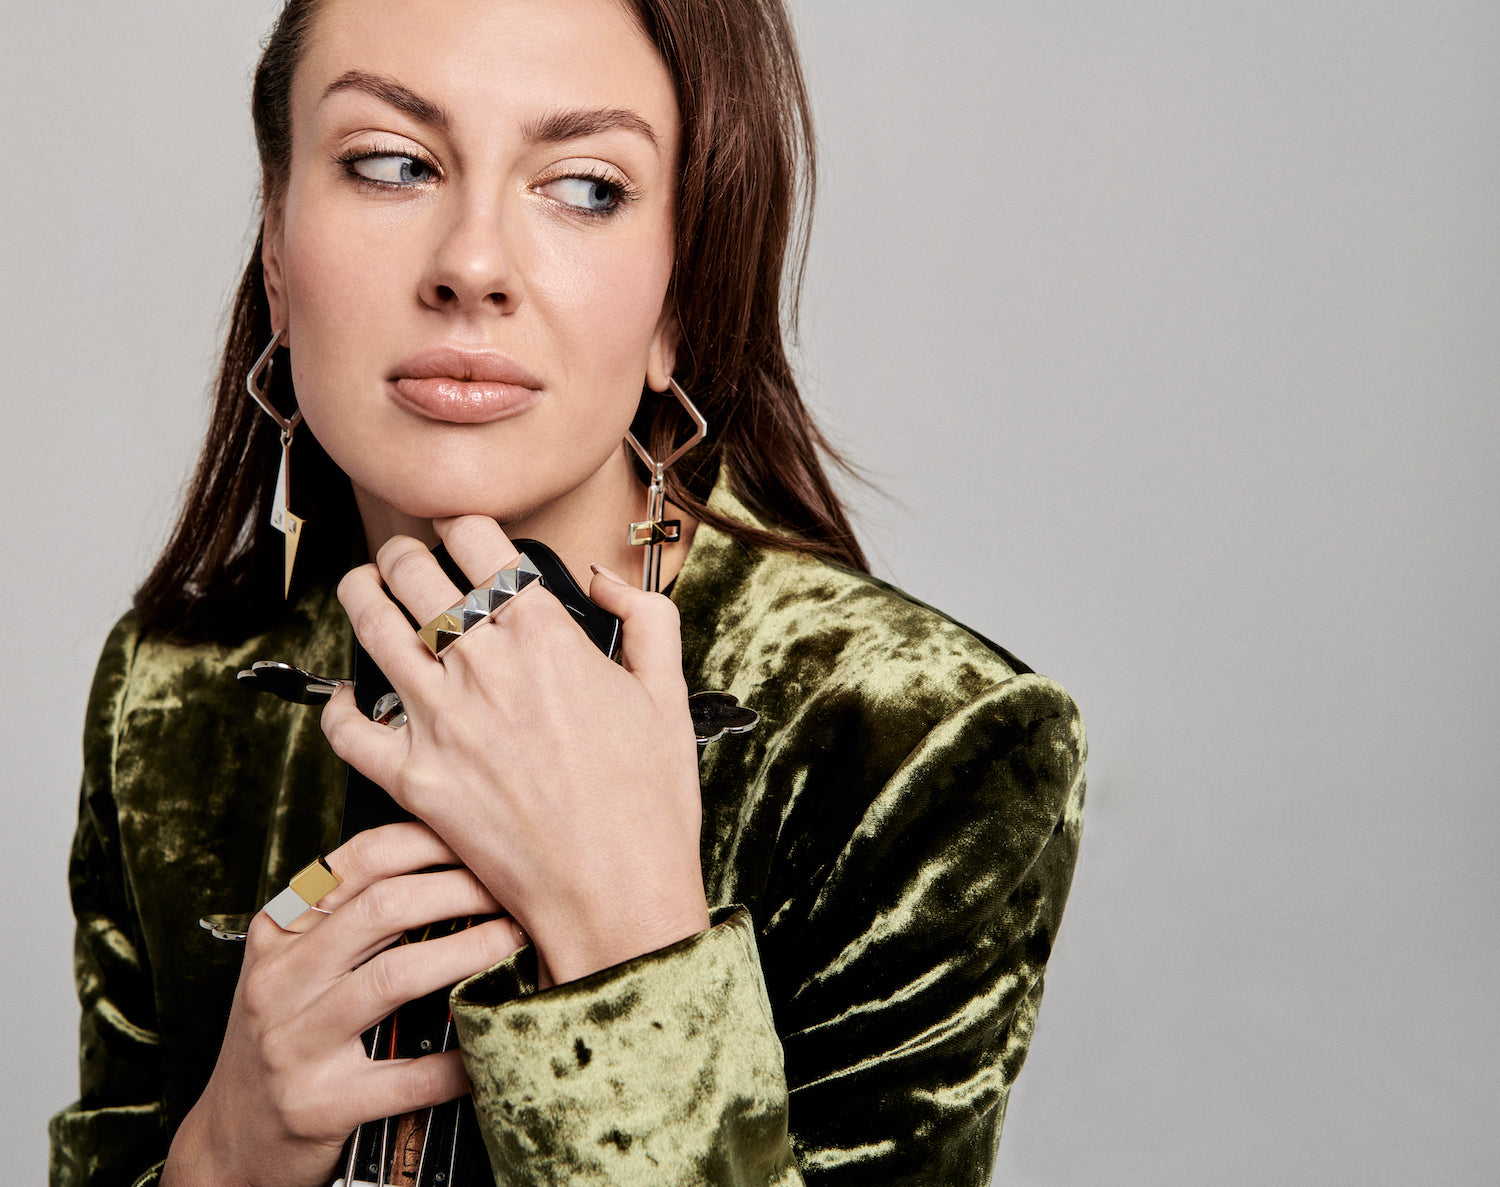 Cirkl's mix n match principle featured in this image with model wearing 4 statement pieces. Rebel Rebel stud ring, plus a uniquely designed glamrock inspired statement ring and, 2 statement earrings featuring asymmetrical styling.